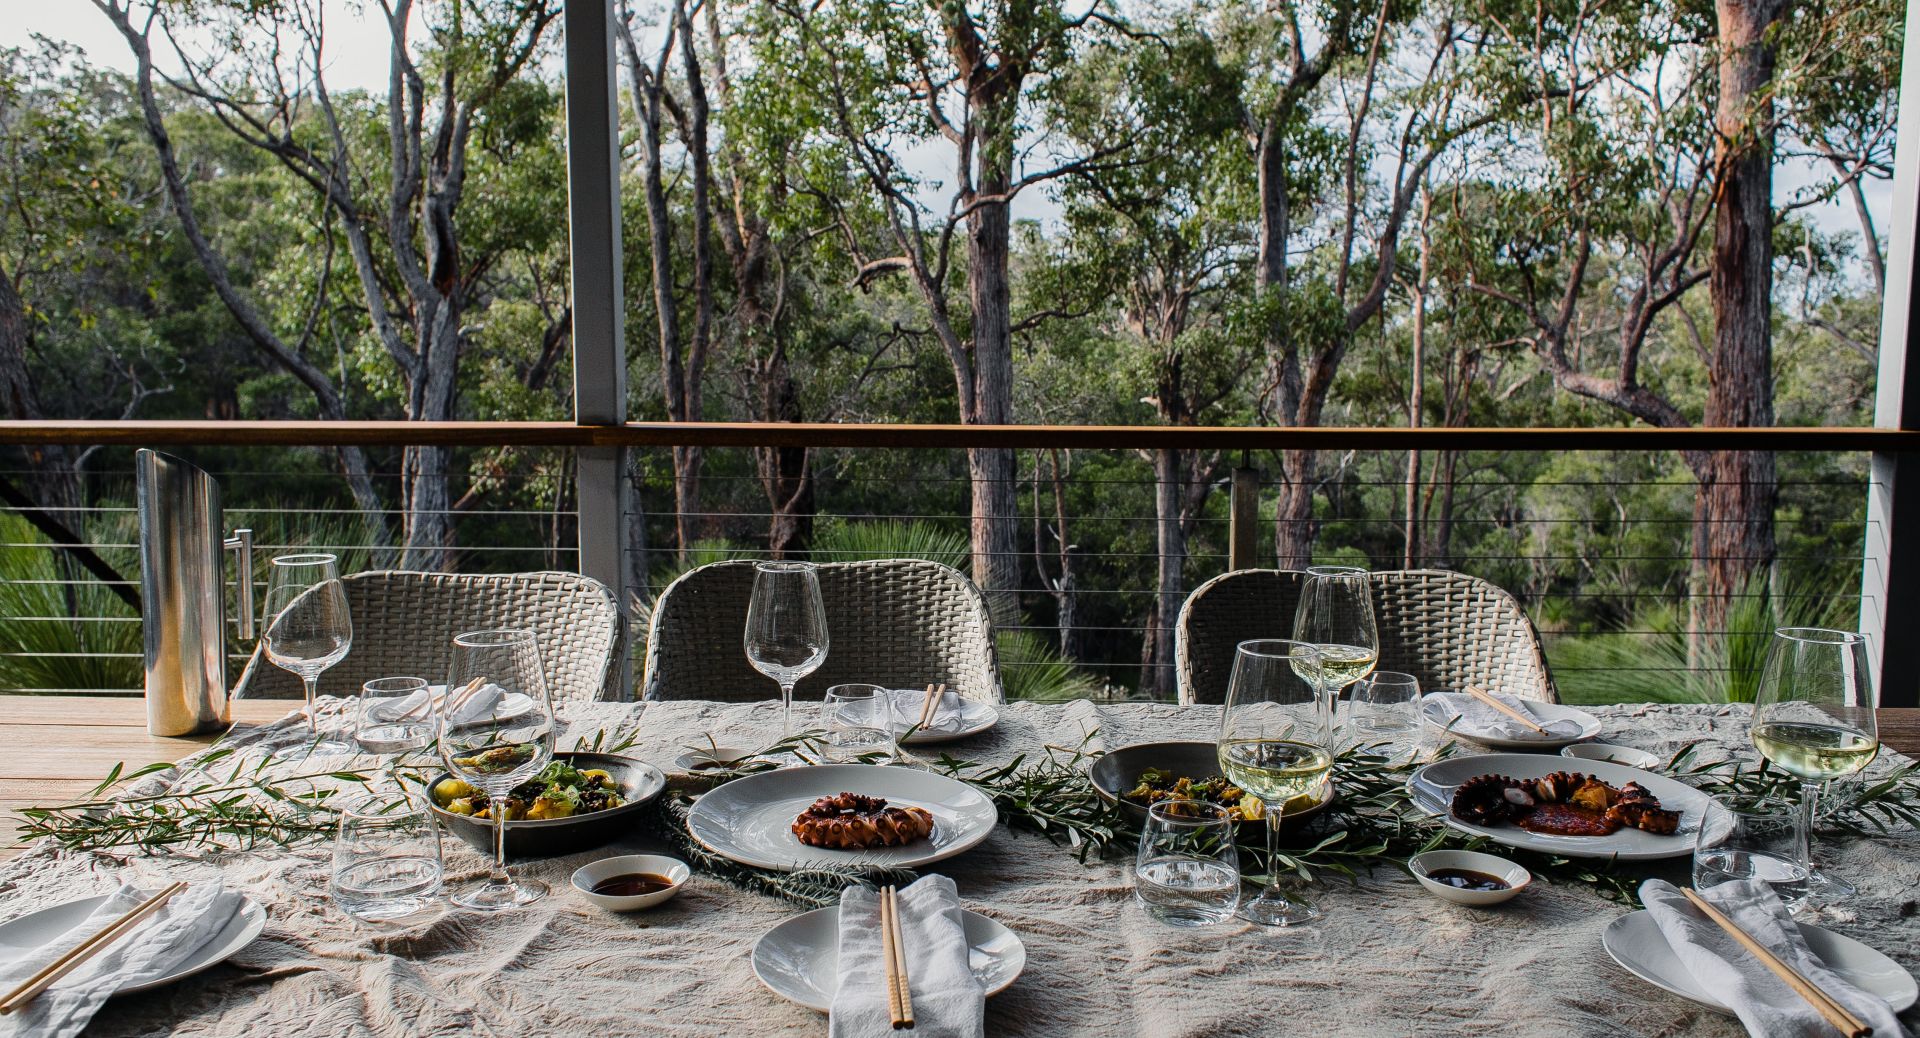 Table served for guests on terrace